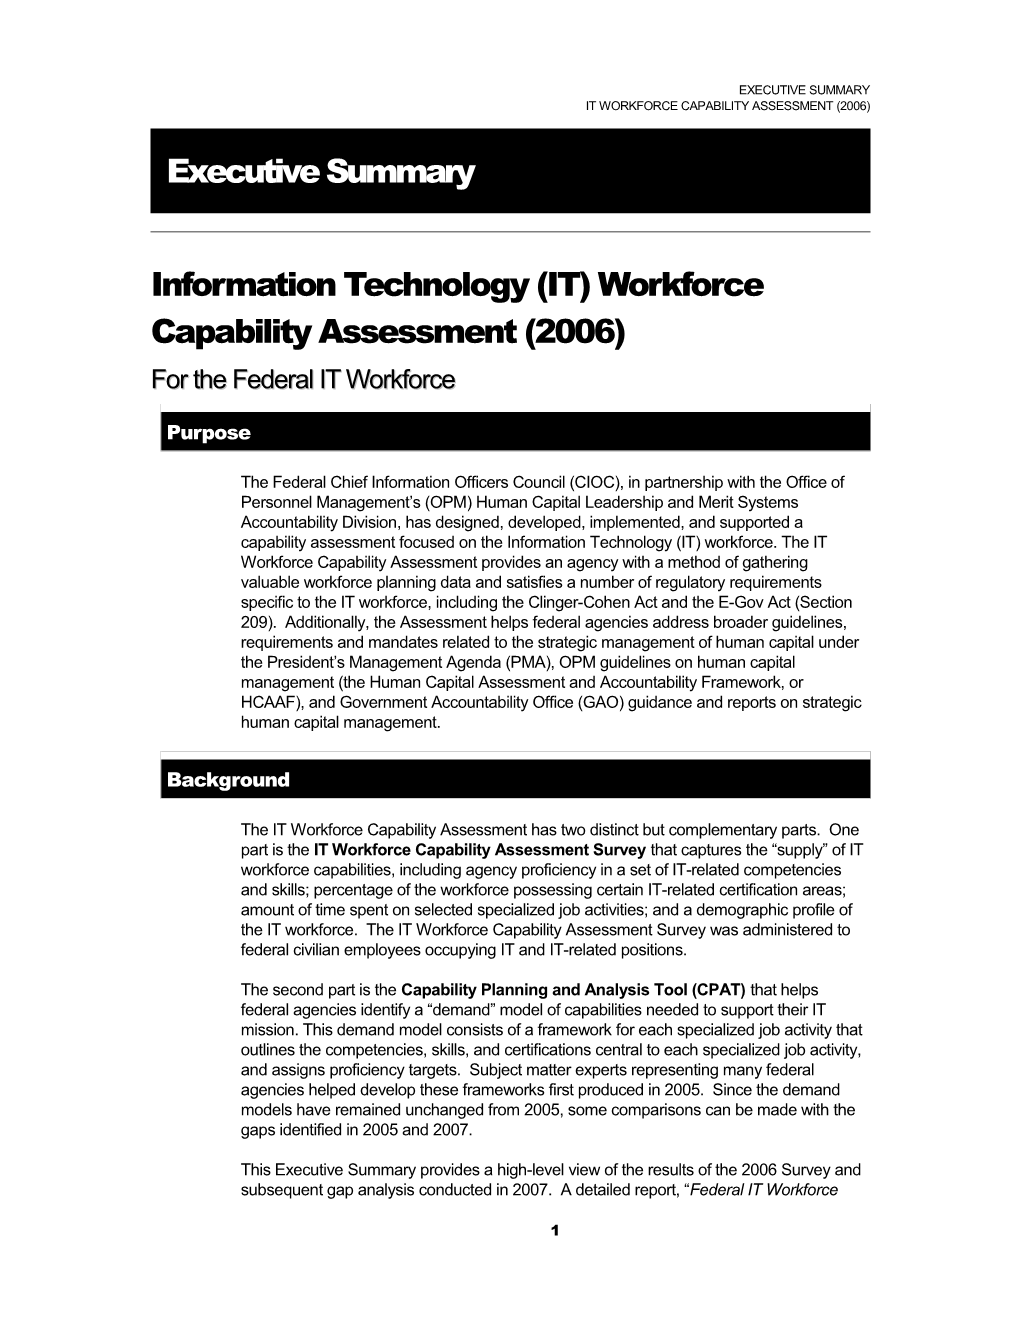 Information Technology (IT) Workforcecapability Assessment (2006)